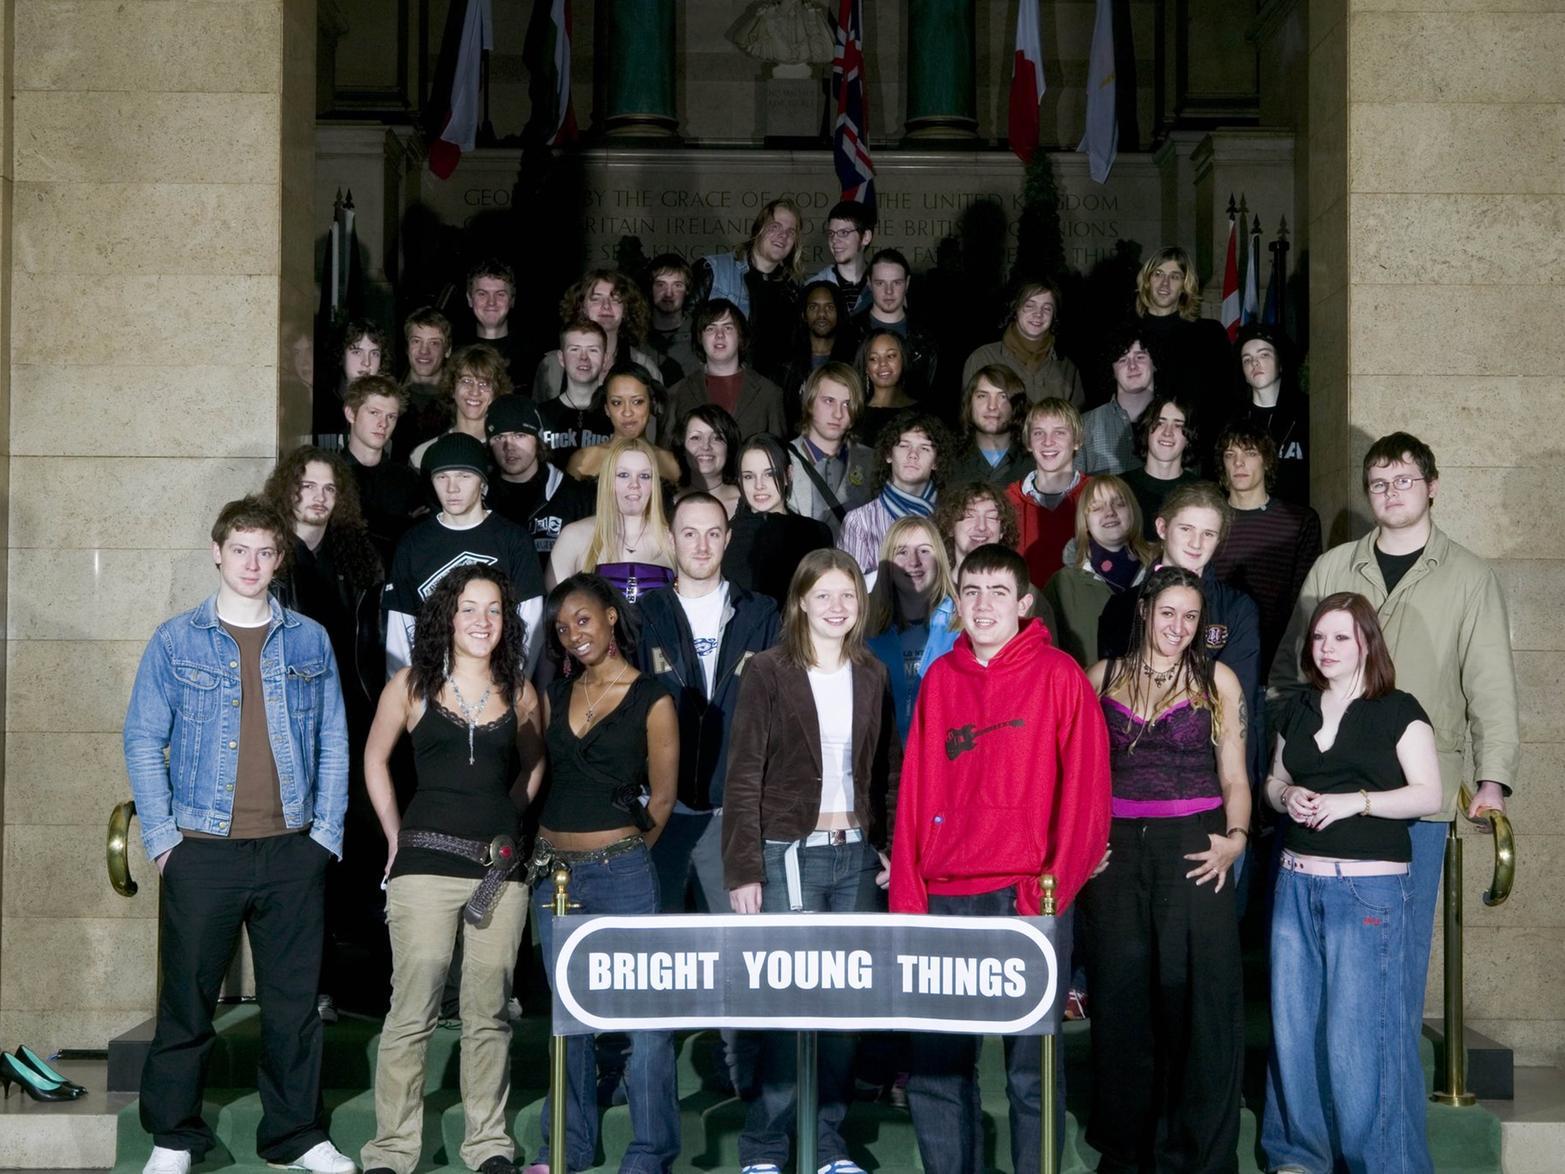 This photo was taken in 2004 - do you recognise the bands and artists?